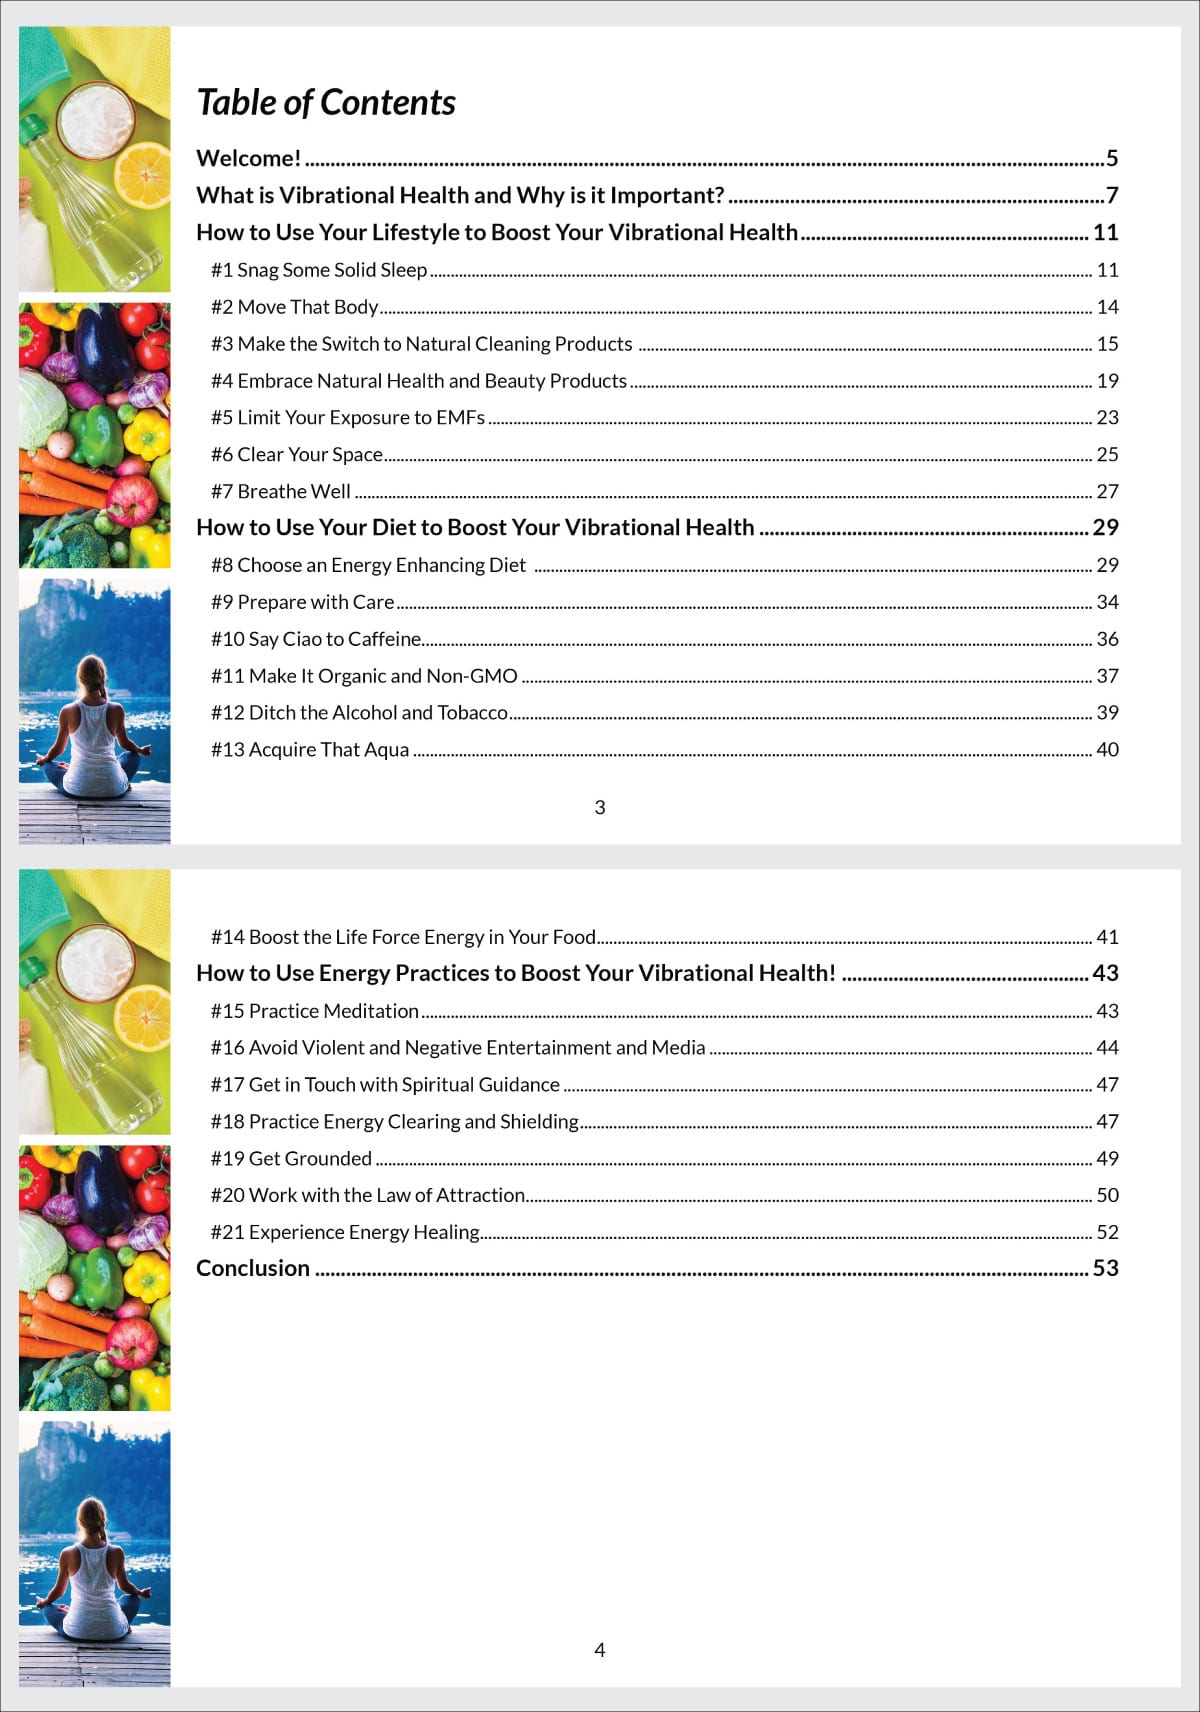 Sneak peak at the Table of Contents of the Vibrational Health Guide